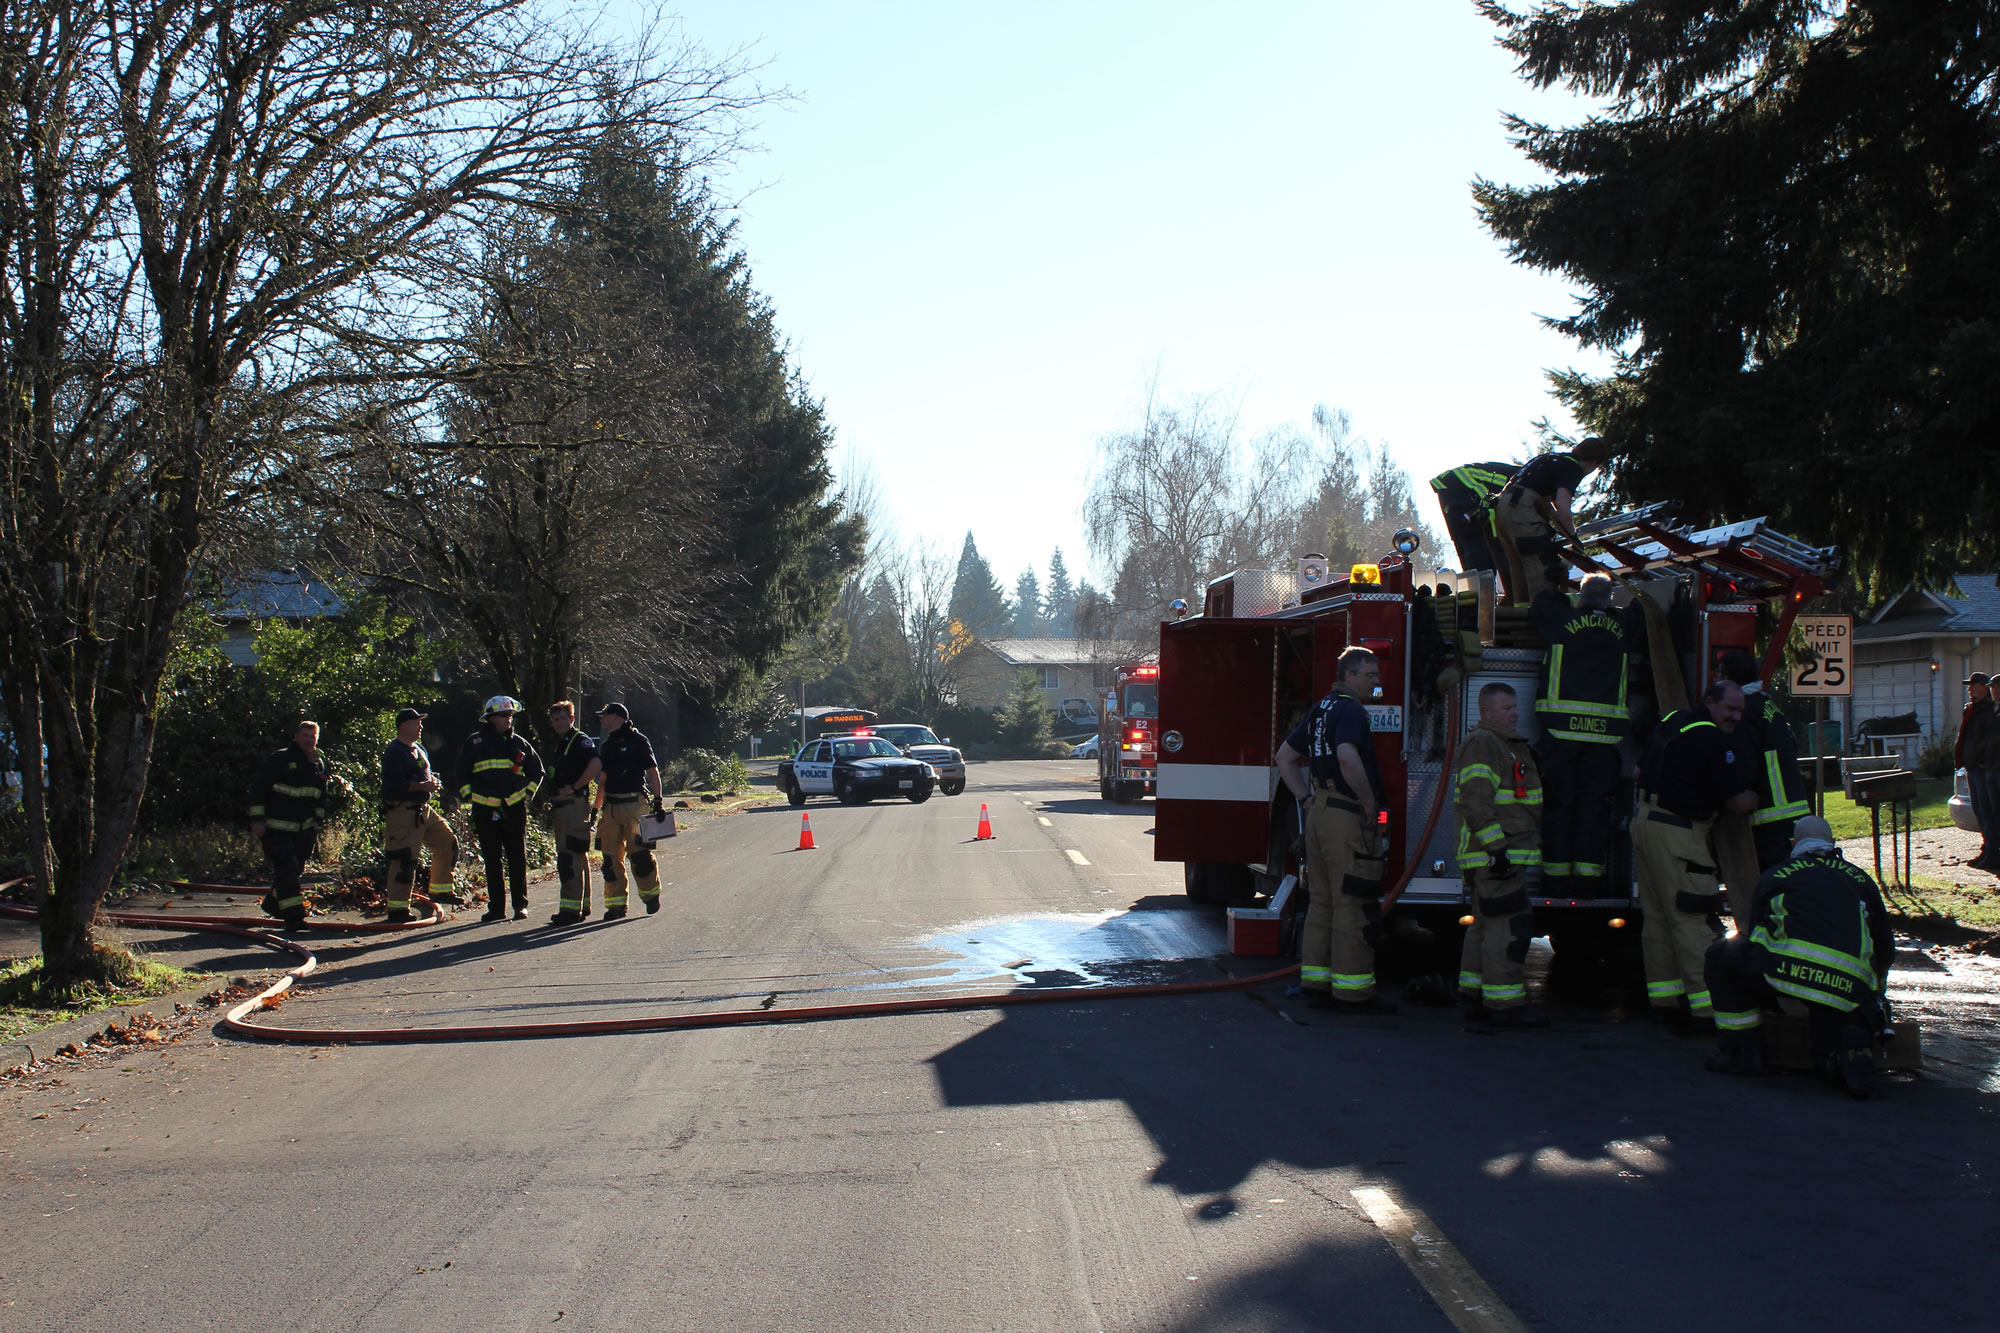 Firefighters from Fire District 6 and the Vancouver Fire Department work the scene of a house fire at Northwest Bernie Drive on Thursday, Dec. 7, 2017. A fire district spokesman said the fire was contained within five minutes.